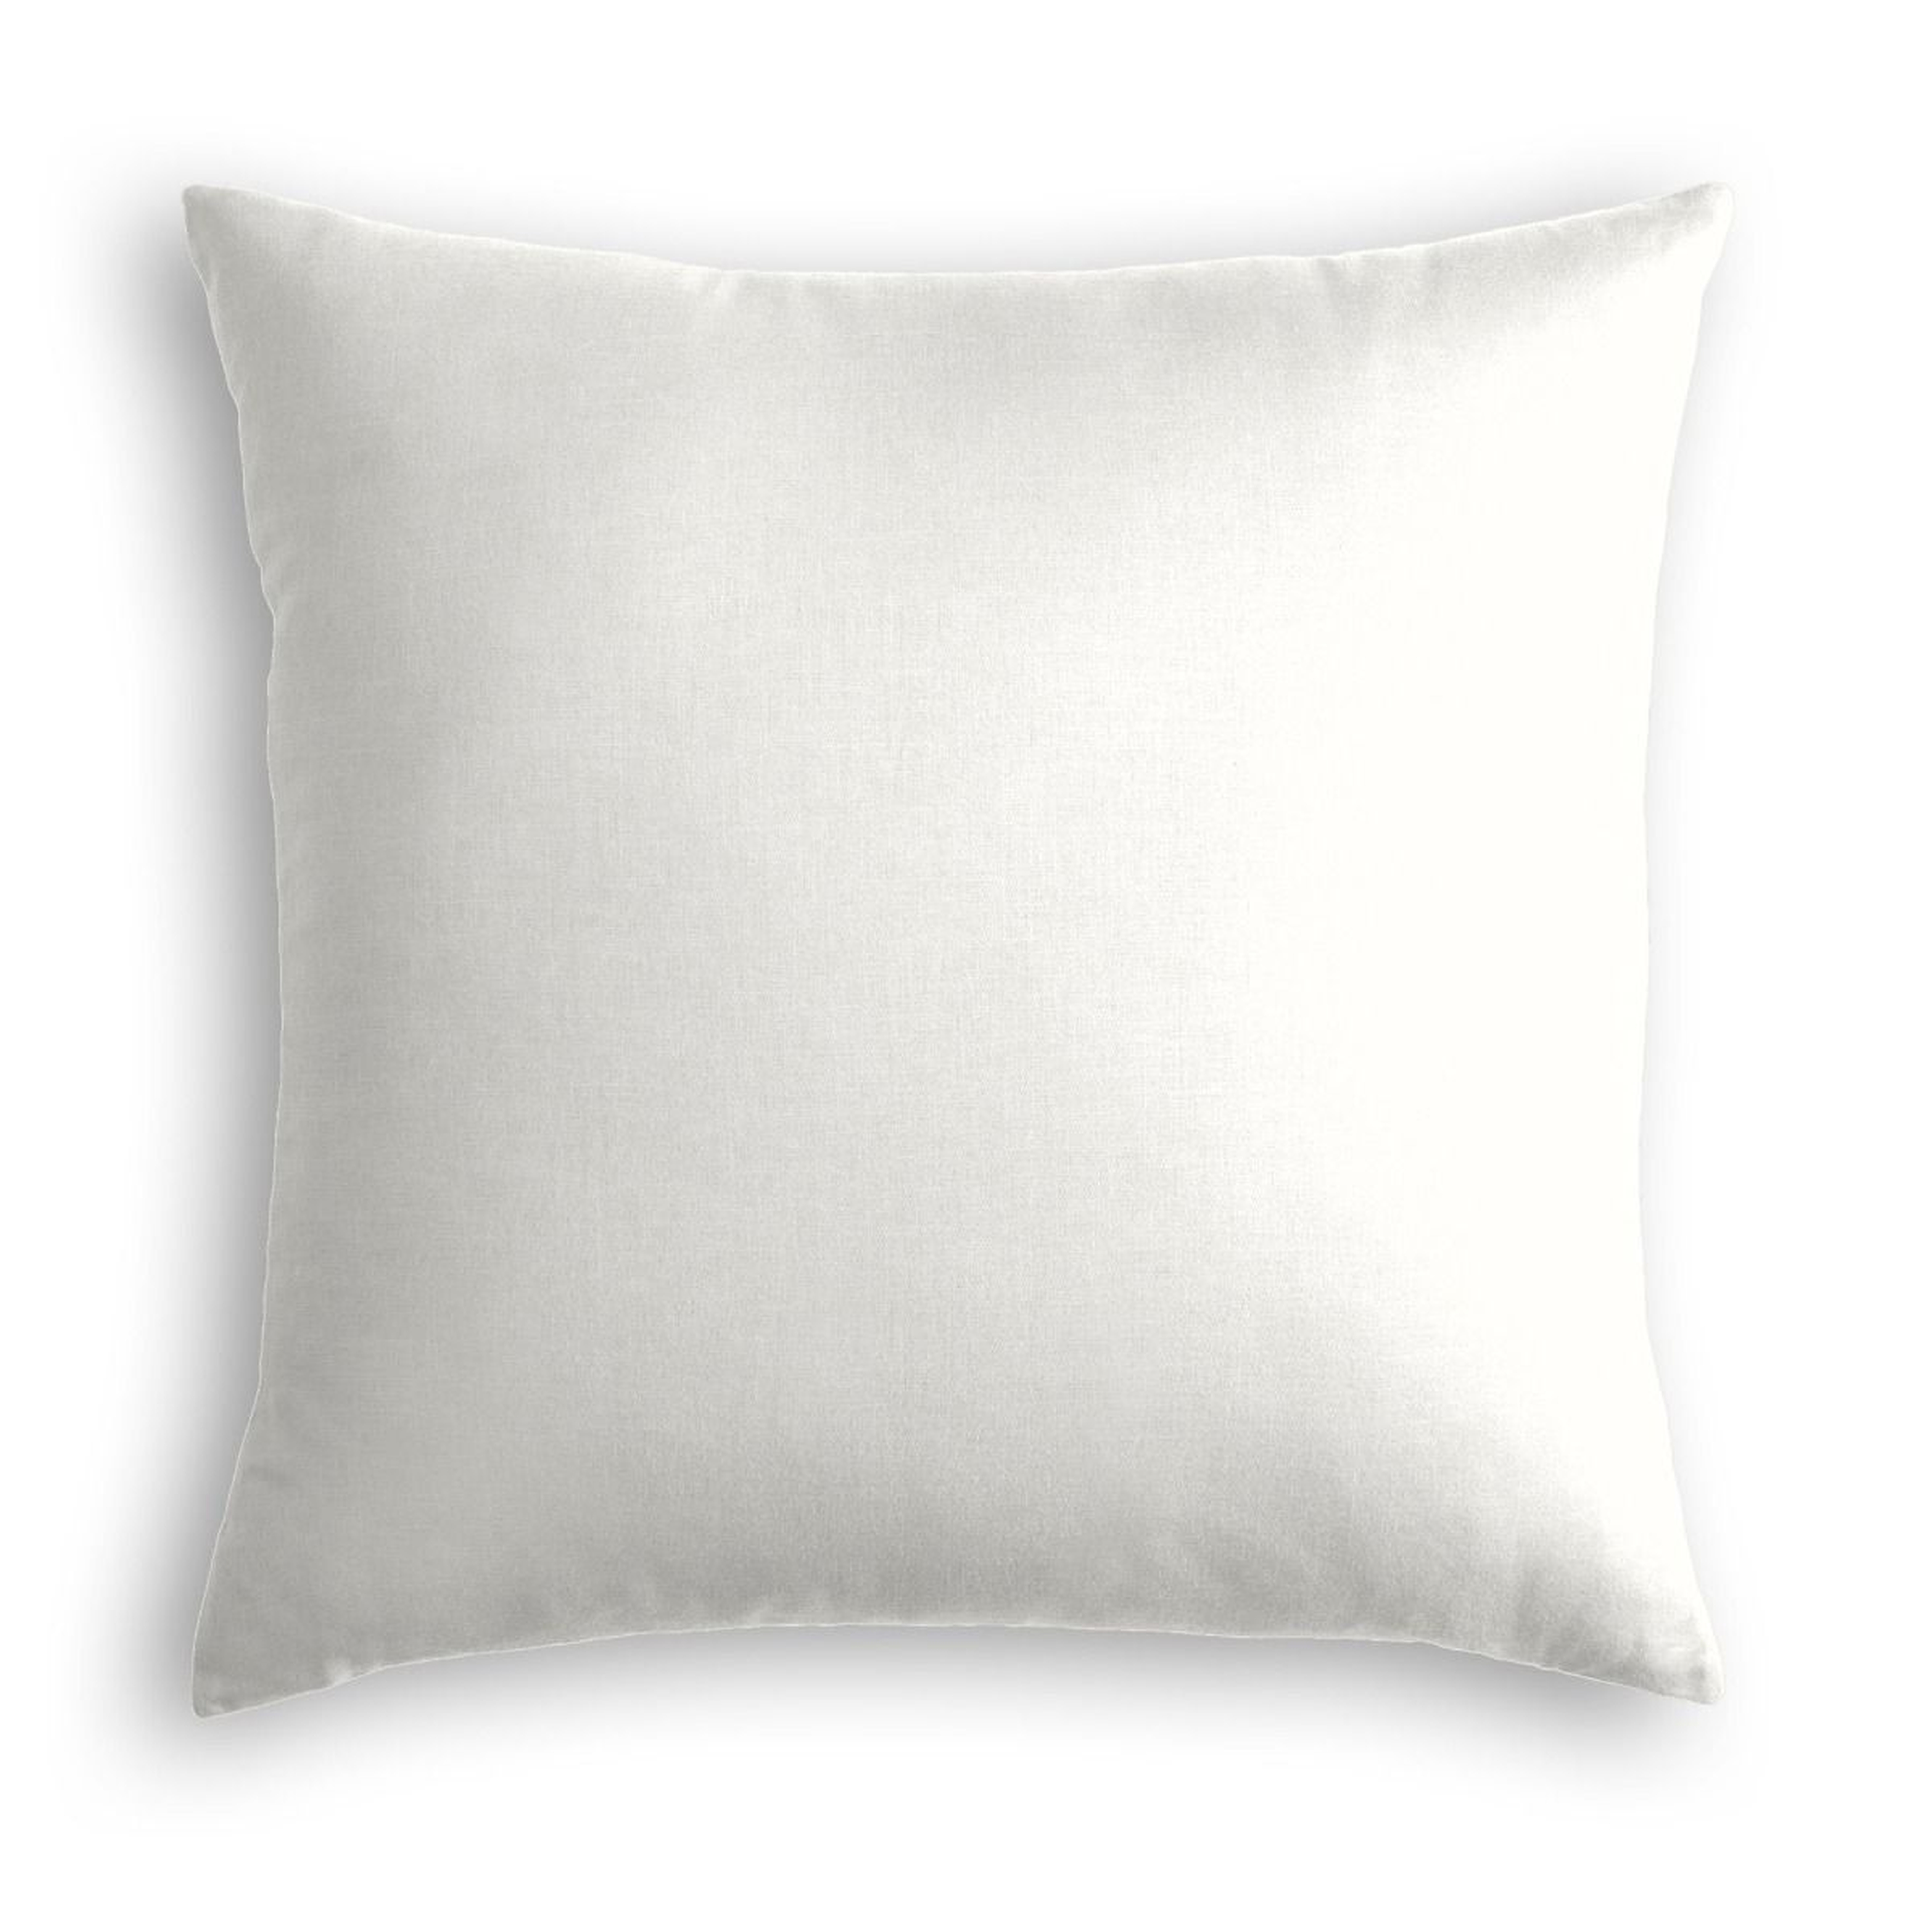 Classic Linen Pillow, Ivory, 18" x 18" - Havenly Essentials